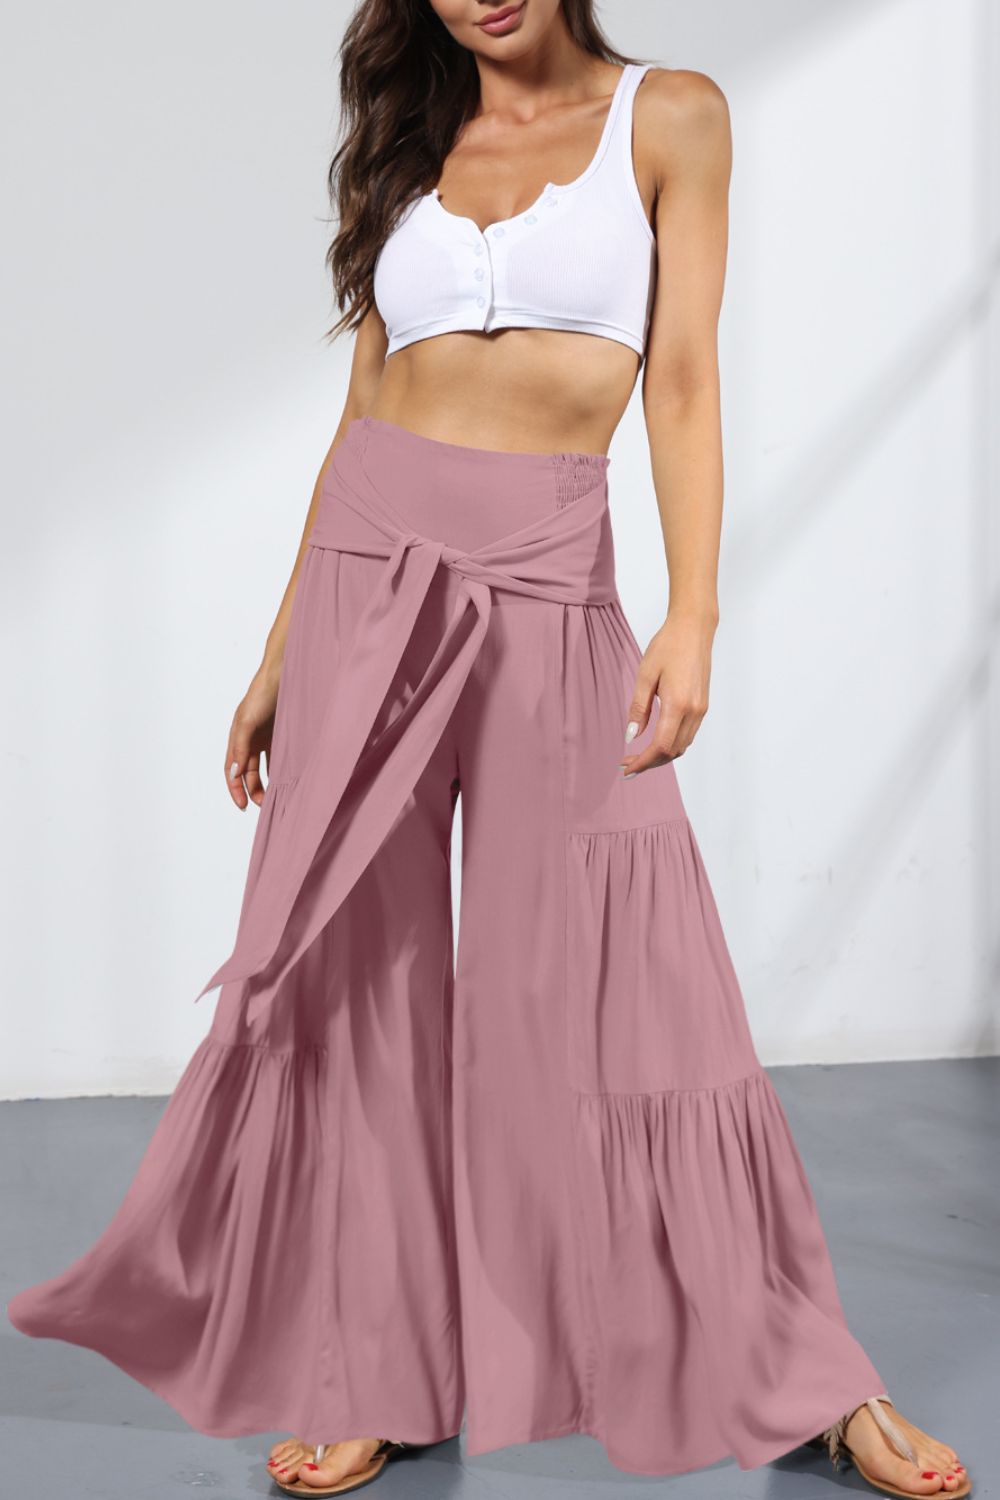 Women’s Tie Front Smocked Tiered Culottes